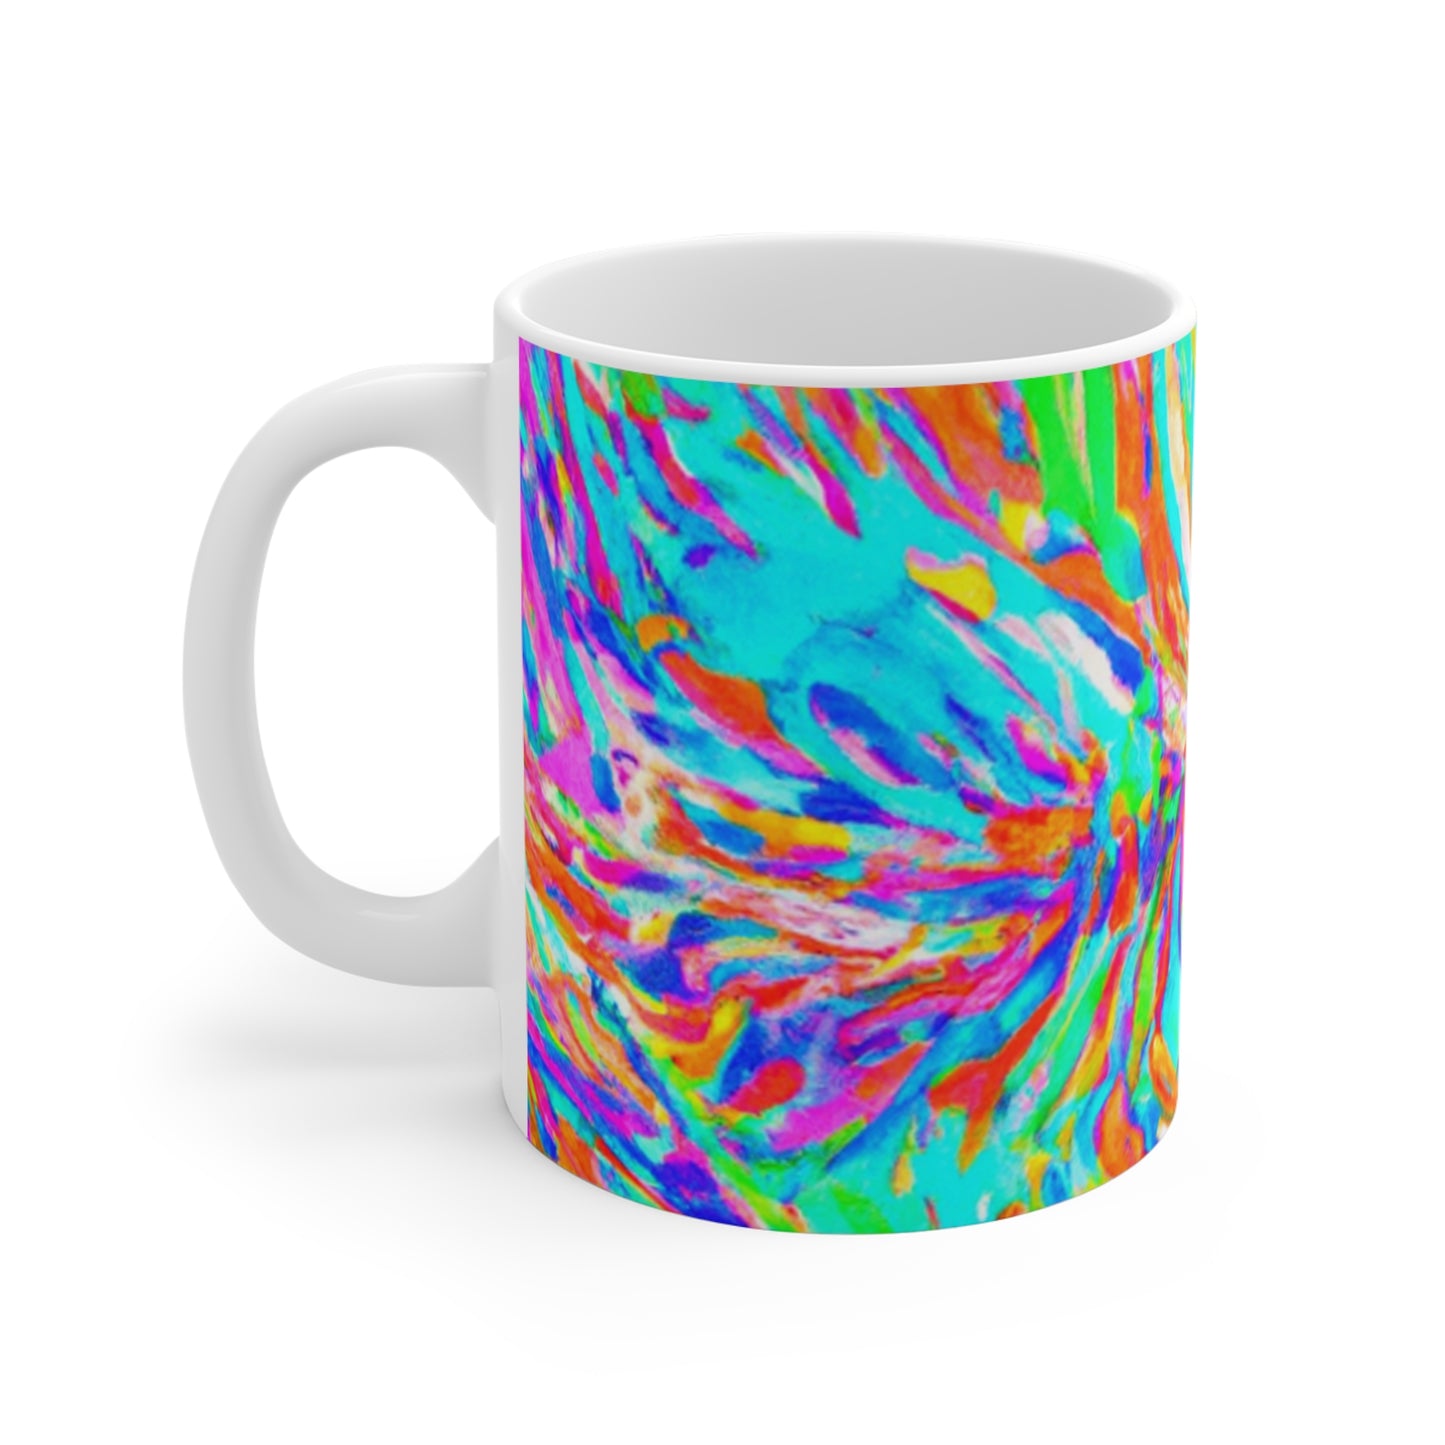 Millie's Coffee - Psychedelic Coffee Cup Mug 11 Ounce